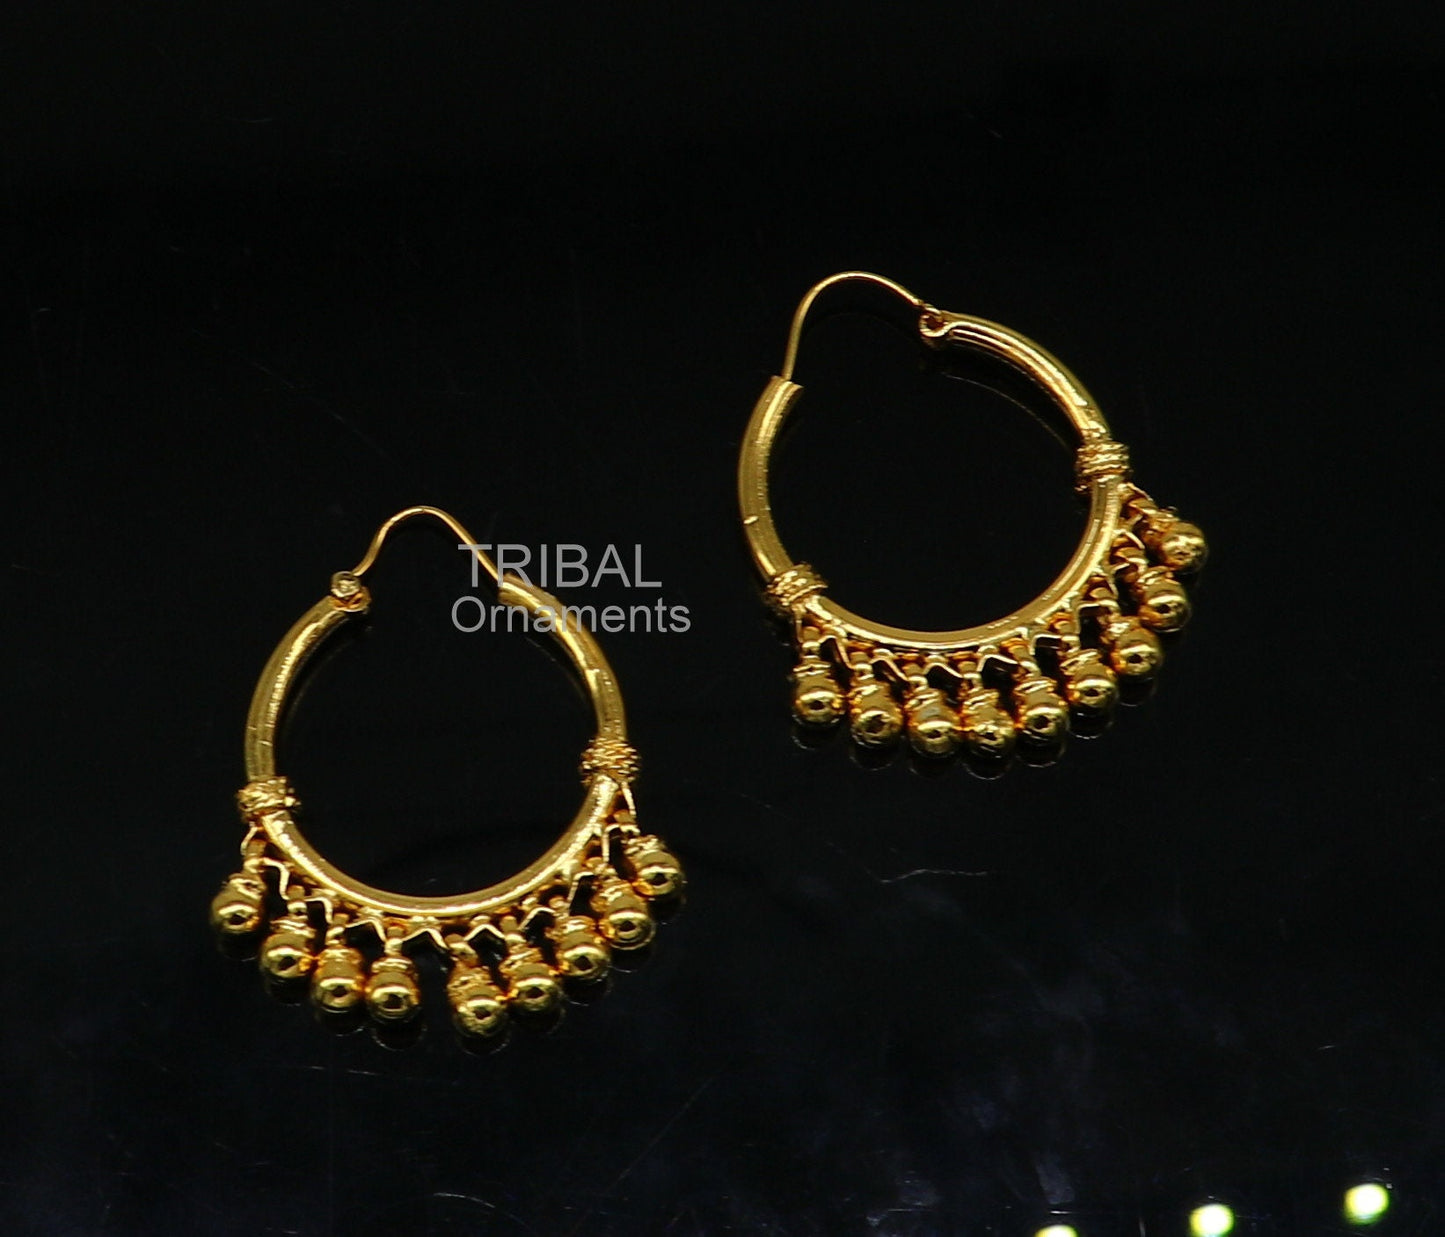 Vintage antique design handmade 925 sterling silver gorgeous gold polished hoops boho earrings bali with bells tribal Banjara jewelry s1147 - TRIBAL ORNAMENTS